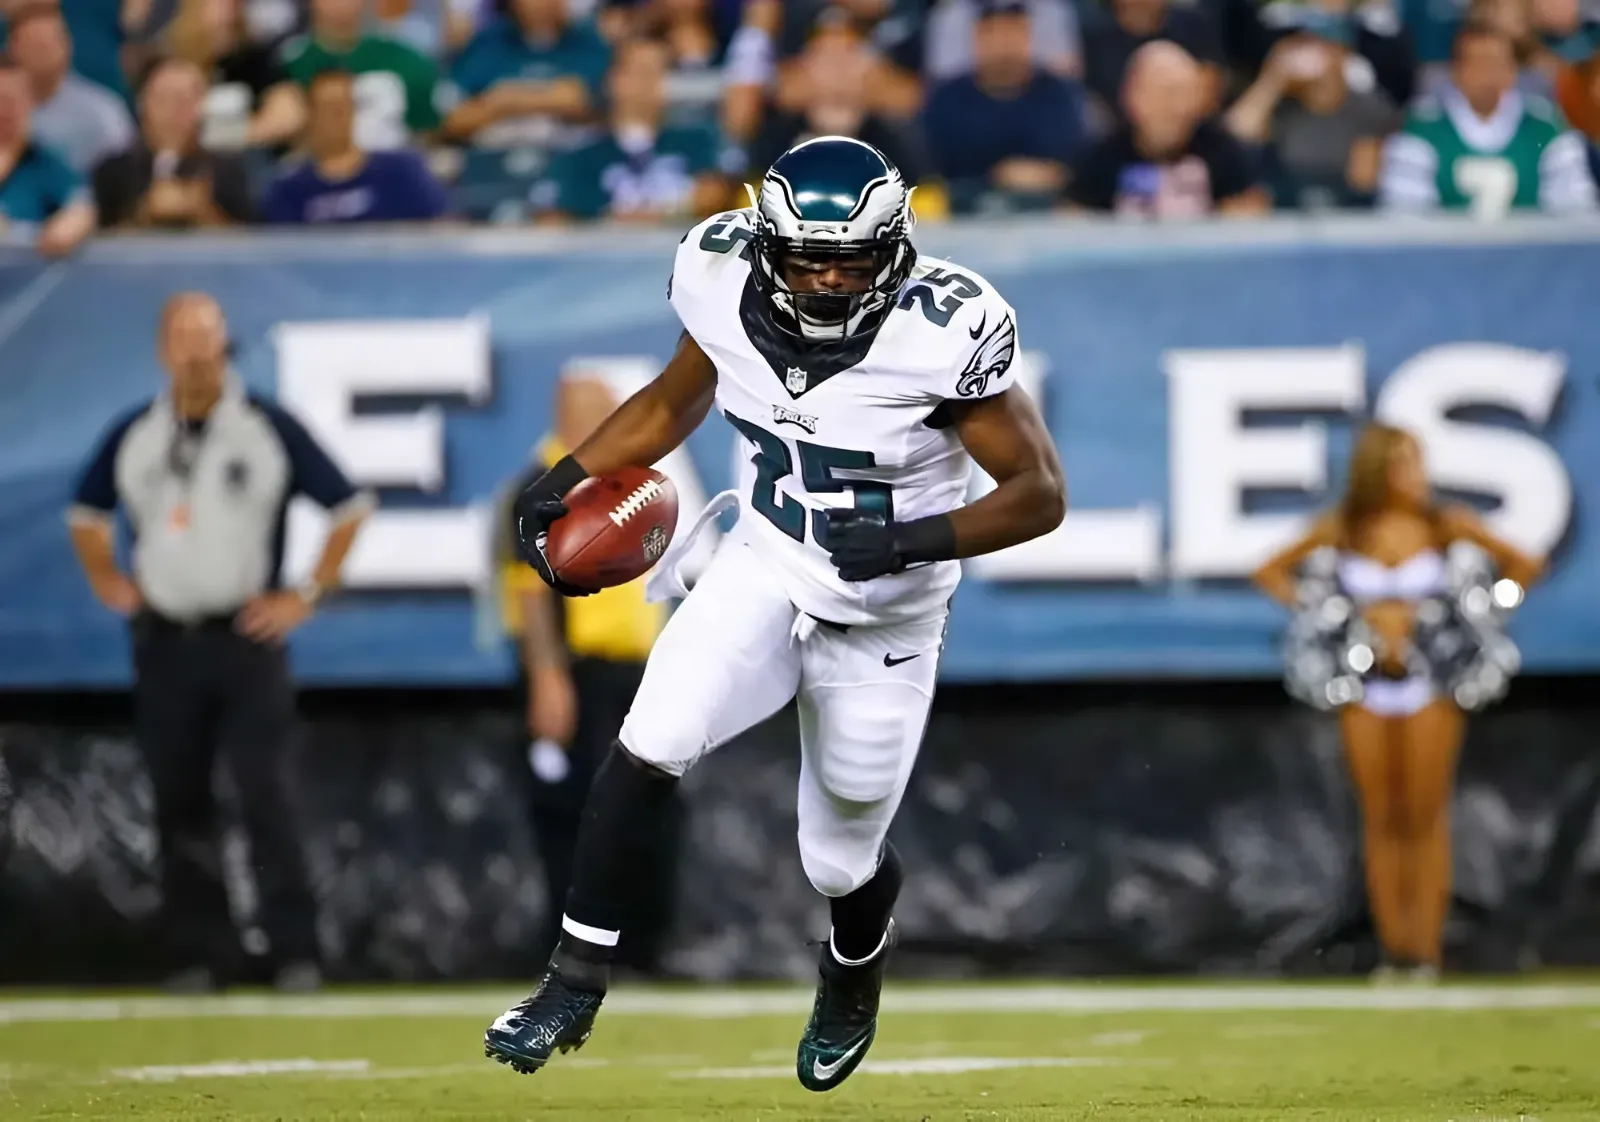 Several Eagles are facing uphill battles in their quest for contract extensions